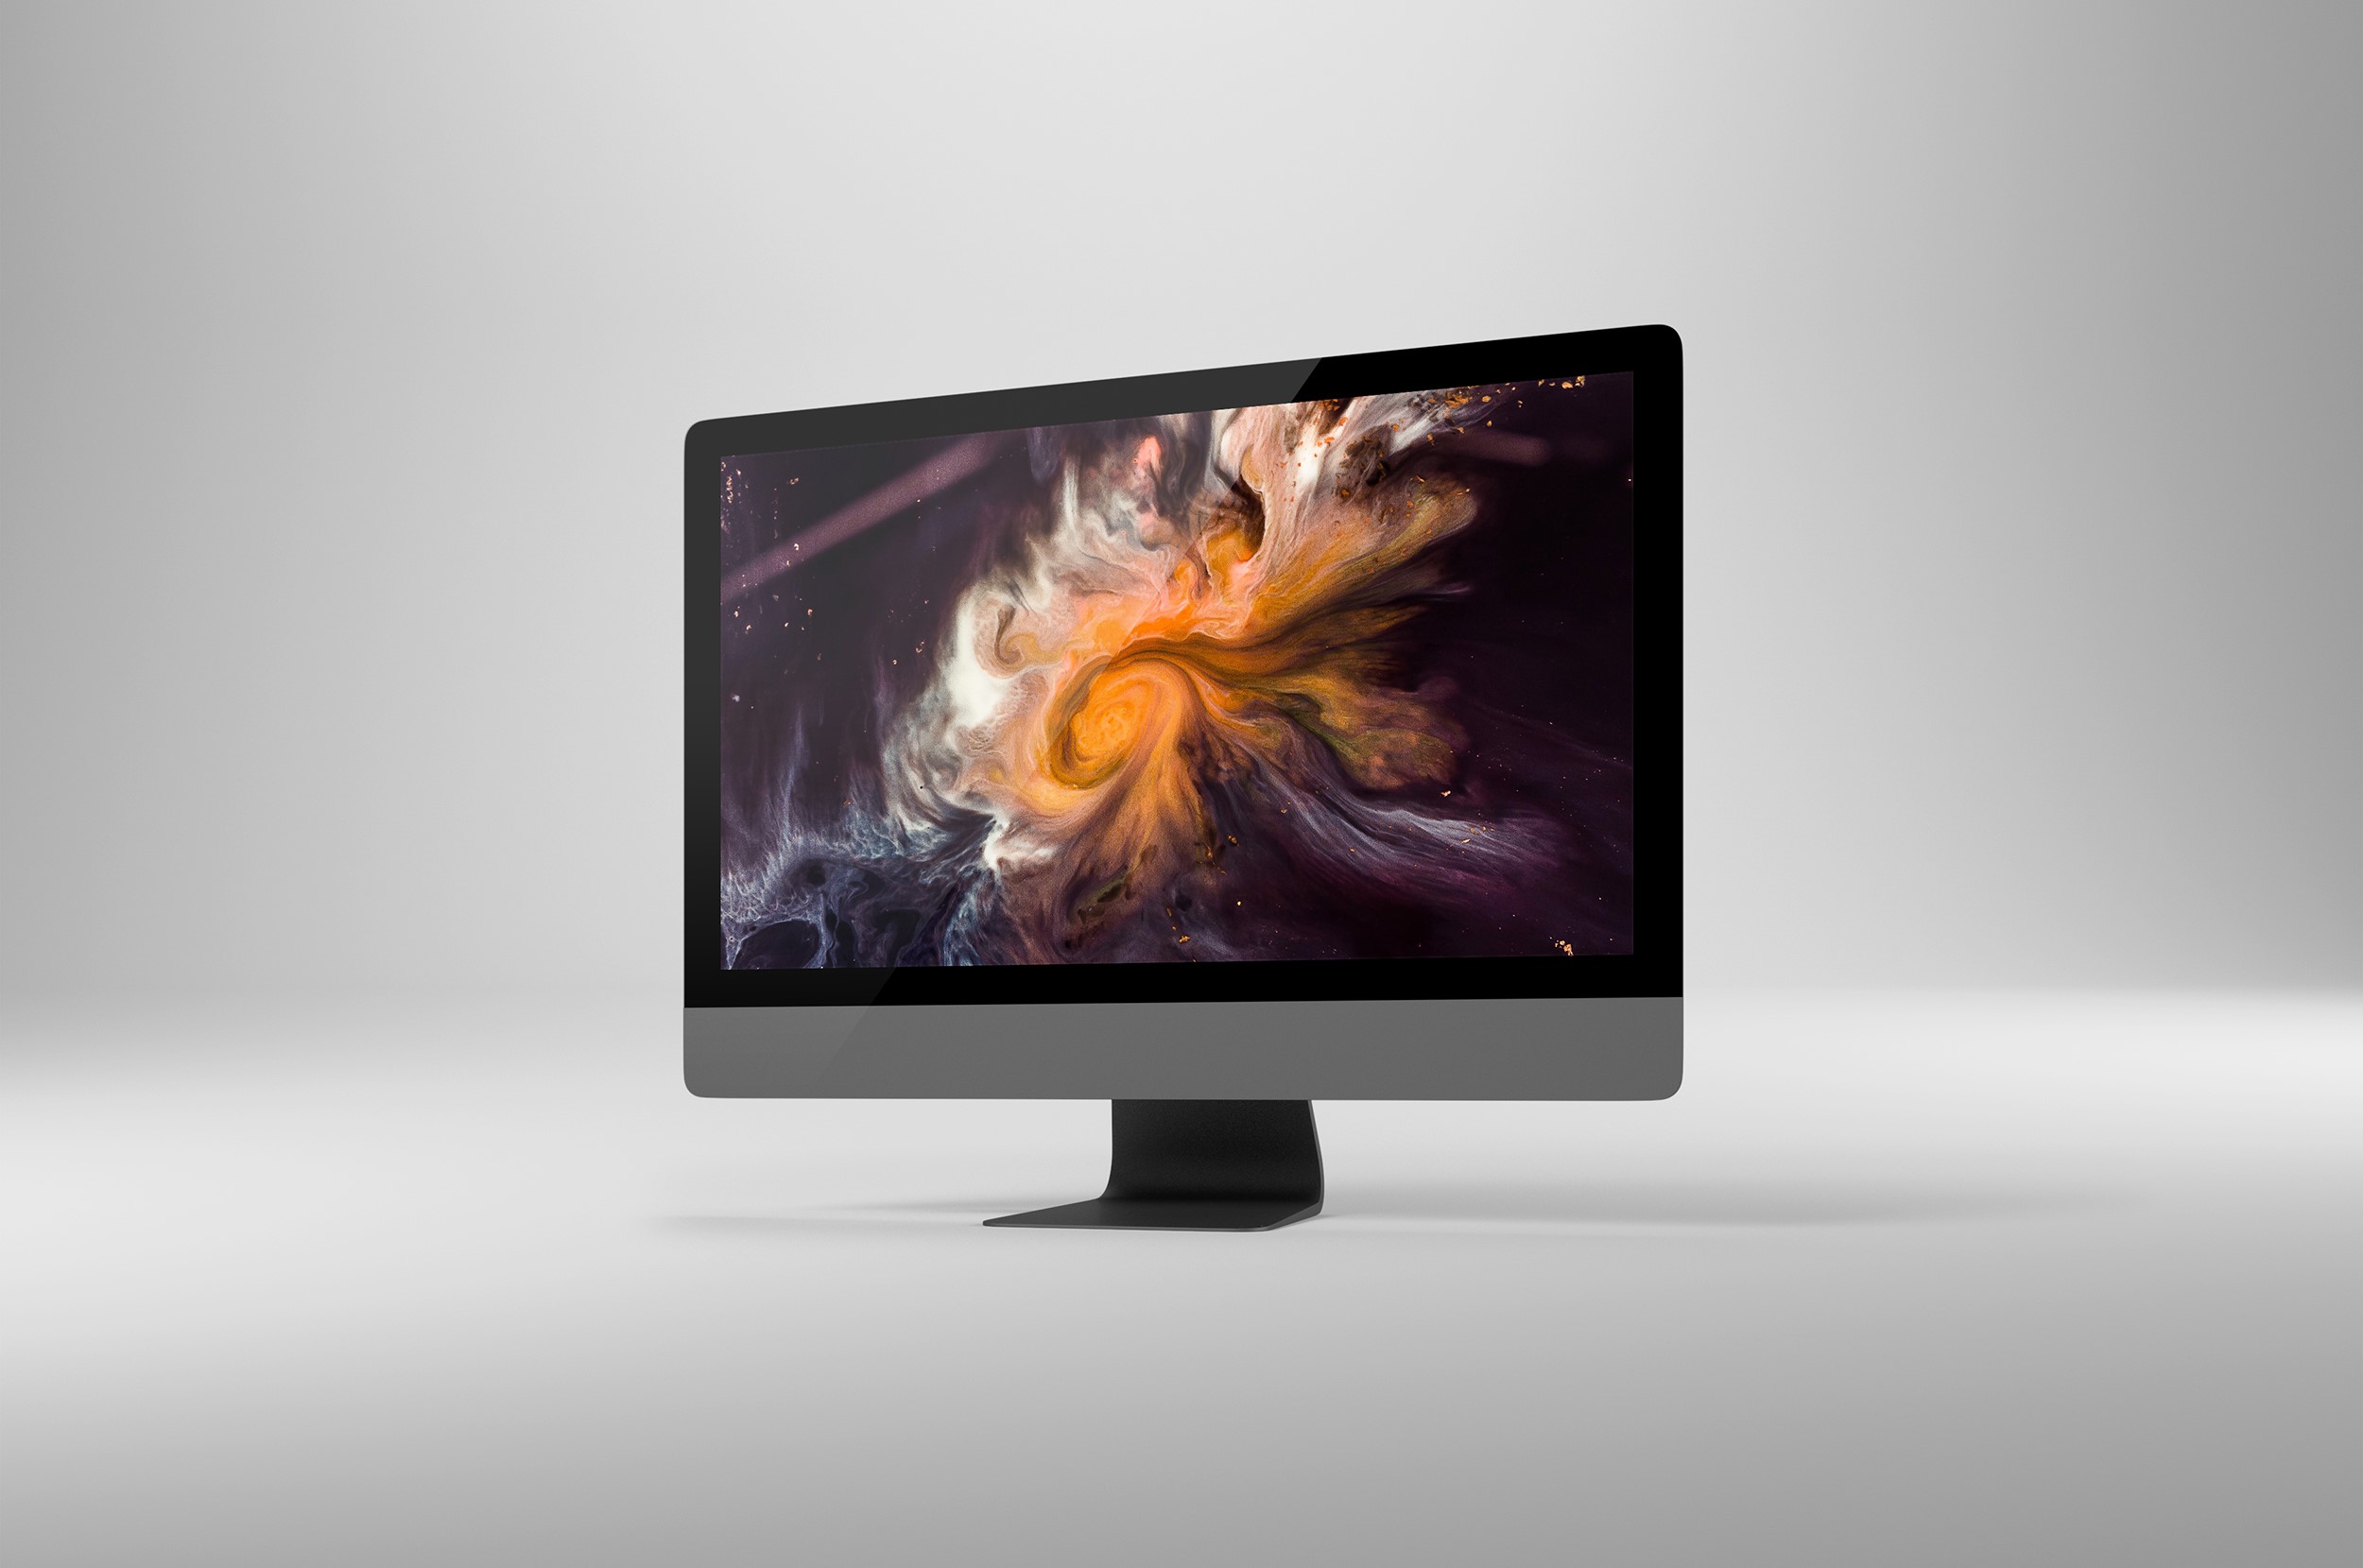 Top 7 Best Monitors for Eye Strain in 2021 [Reviews+Buying Guide]